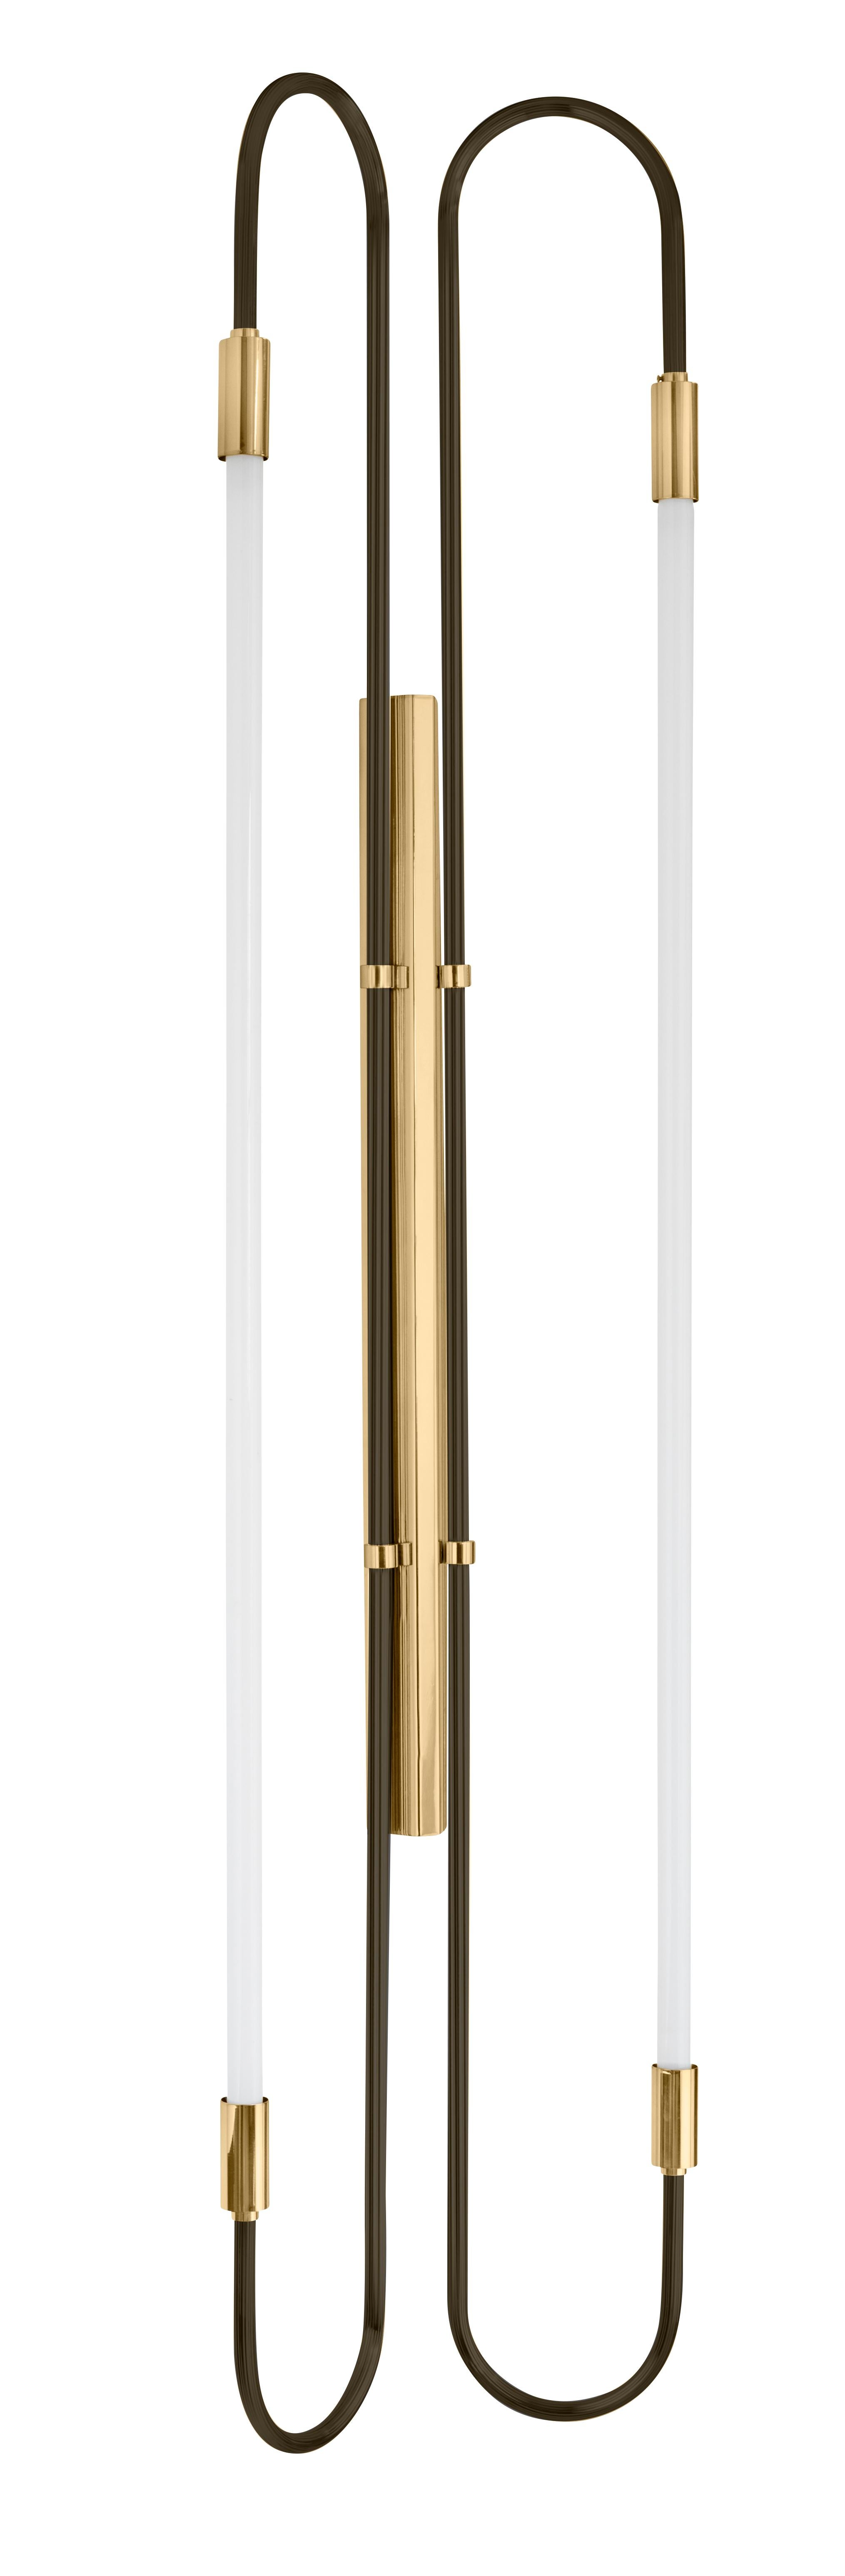 Back and brass wall lamp Neon Double 170 by Magic Circus Editions
Dimensions: H. 170 cm, W. 37 cm, D. 11 cm, 3.6 kg.
Materials: fluted brass tube and glass.
Available finishes: brass (lacquered polished brass, unlacquered polished brass, brushed